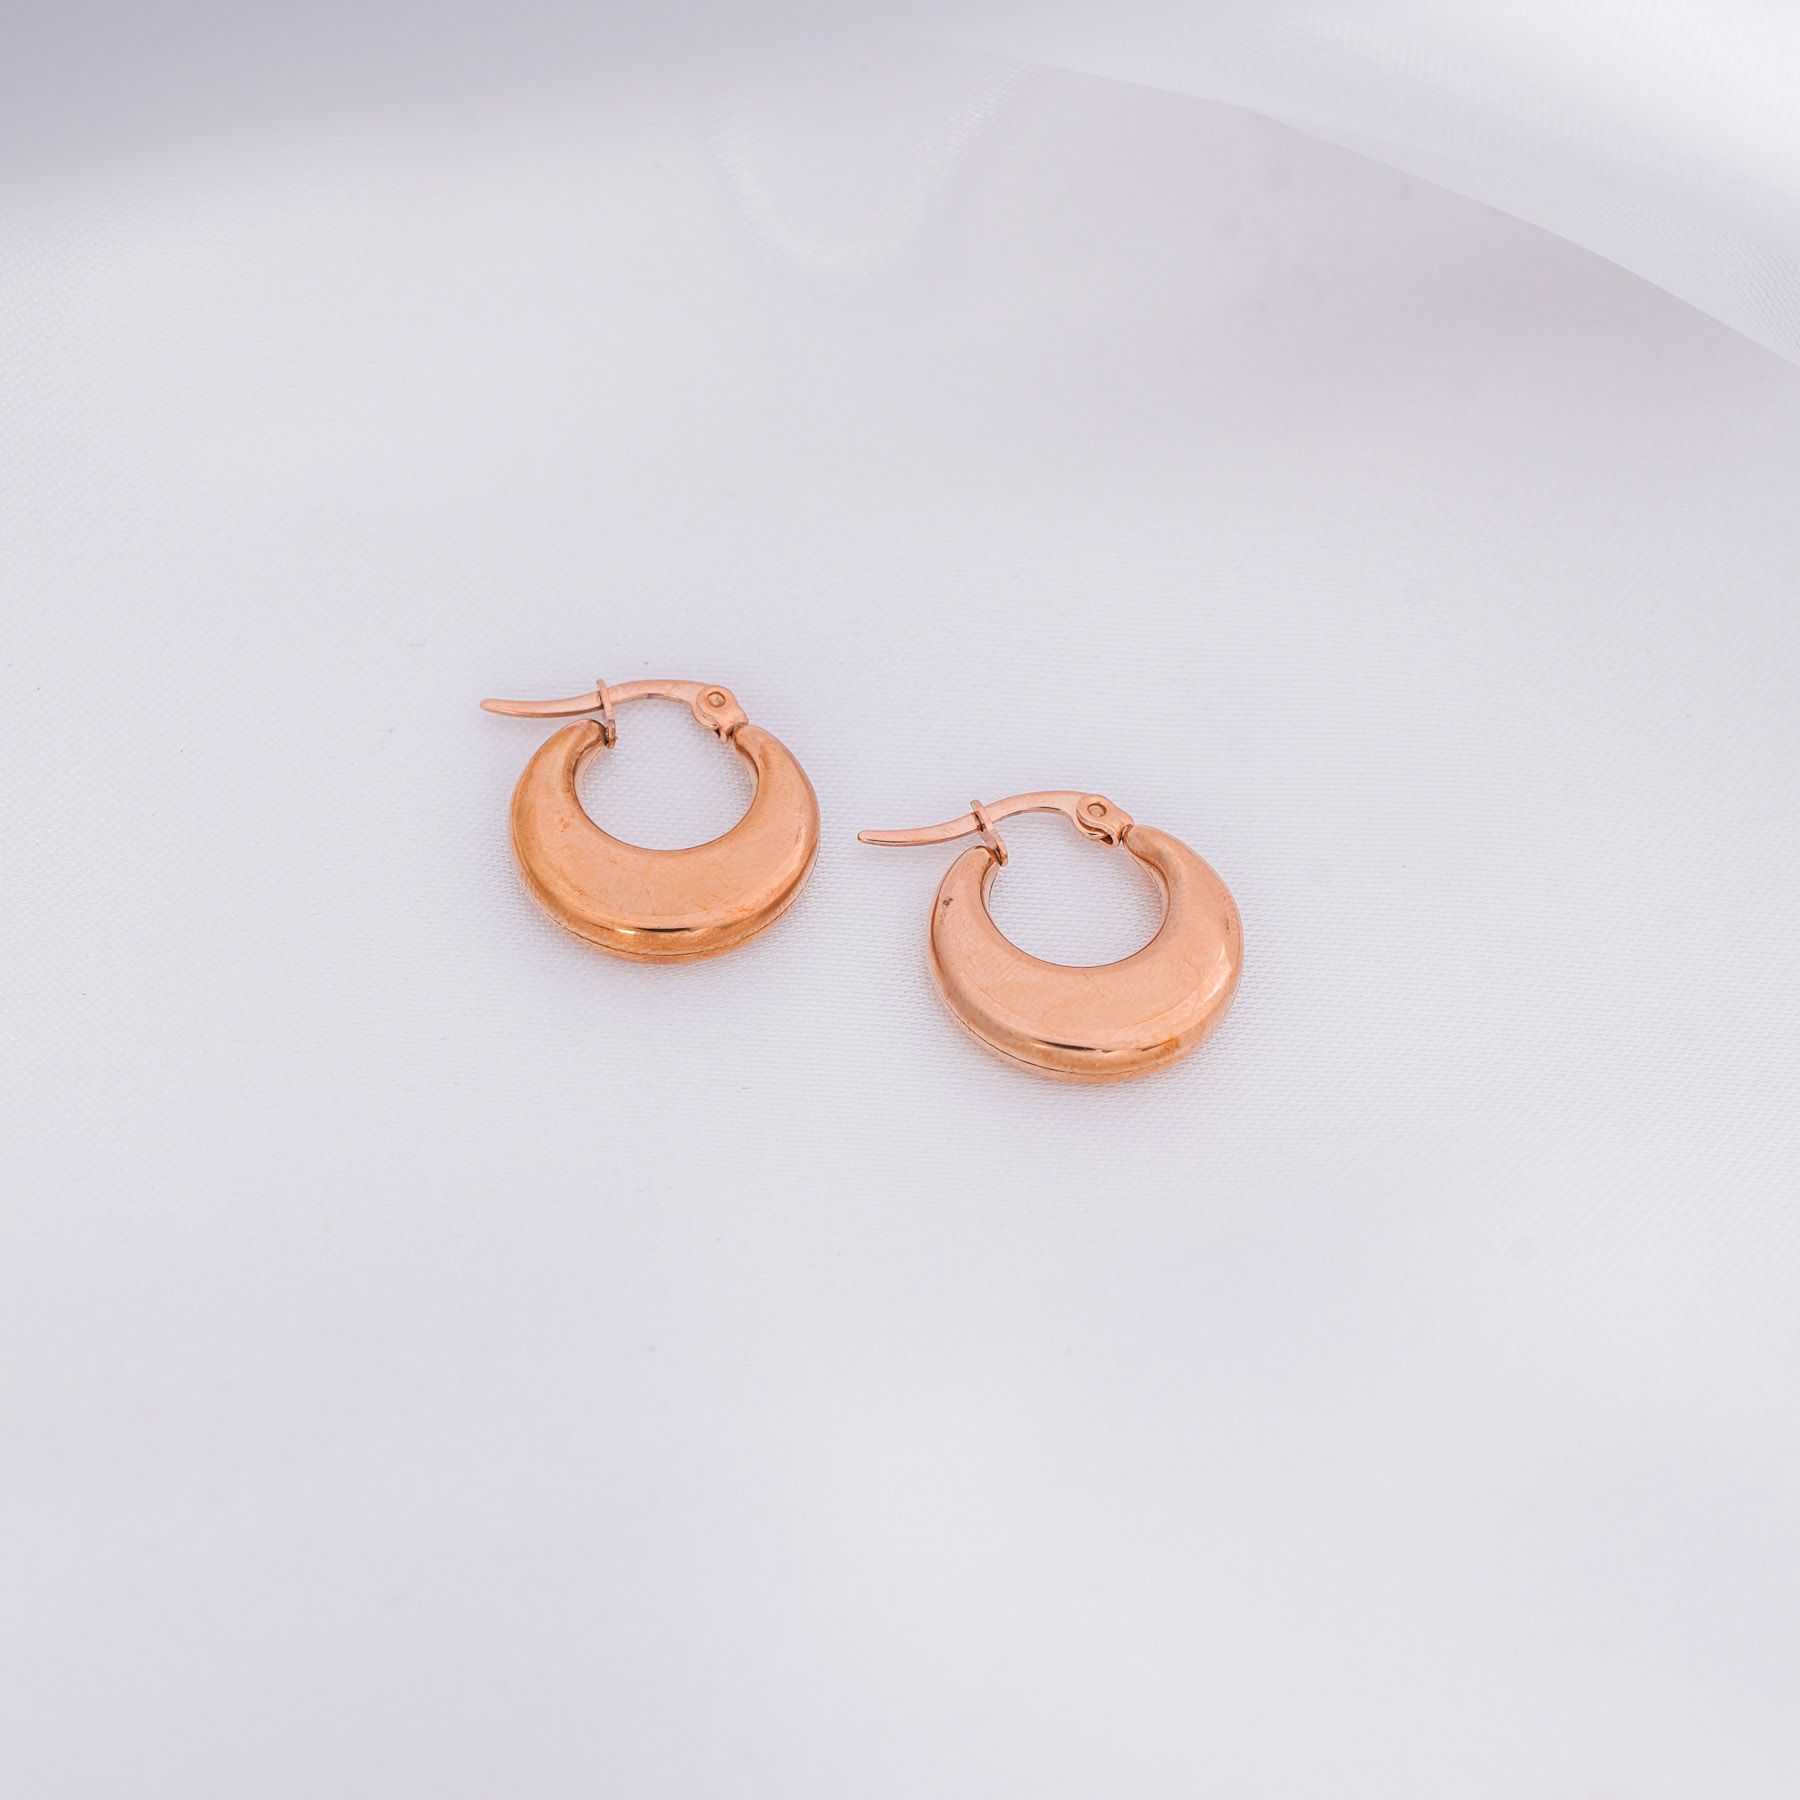 VENICE HOOPS - ROSE GOLD